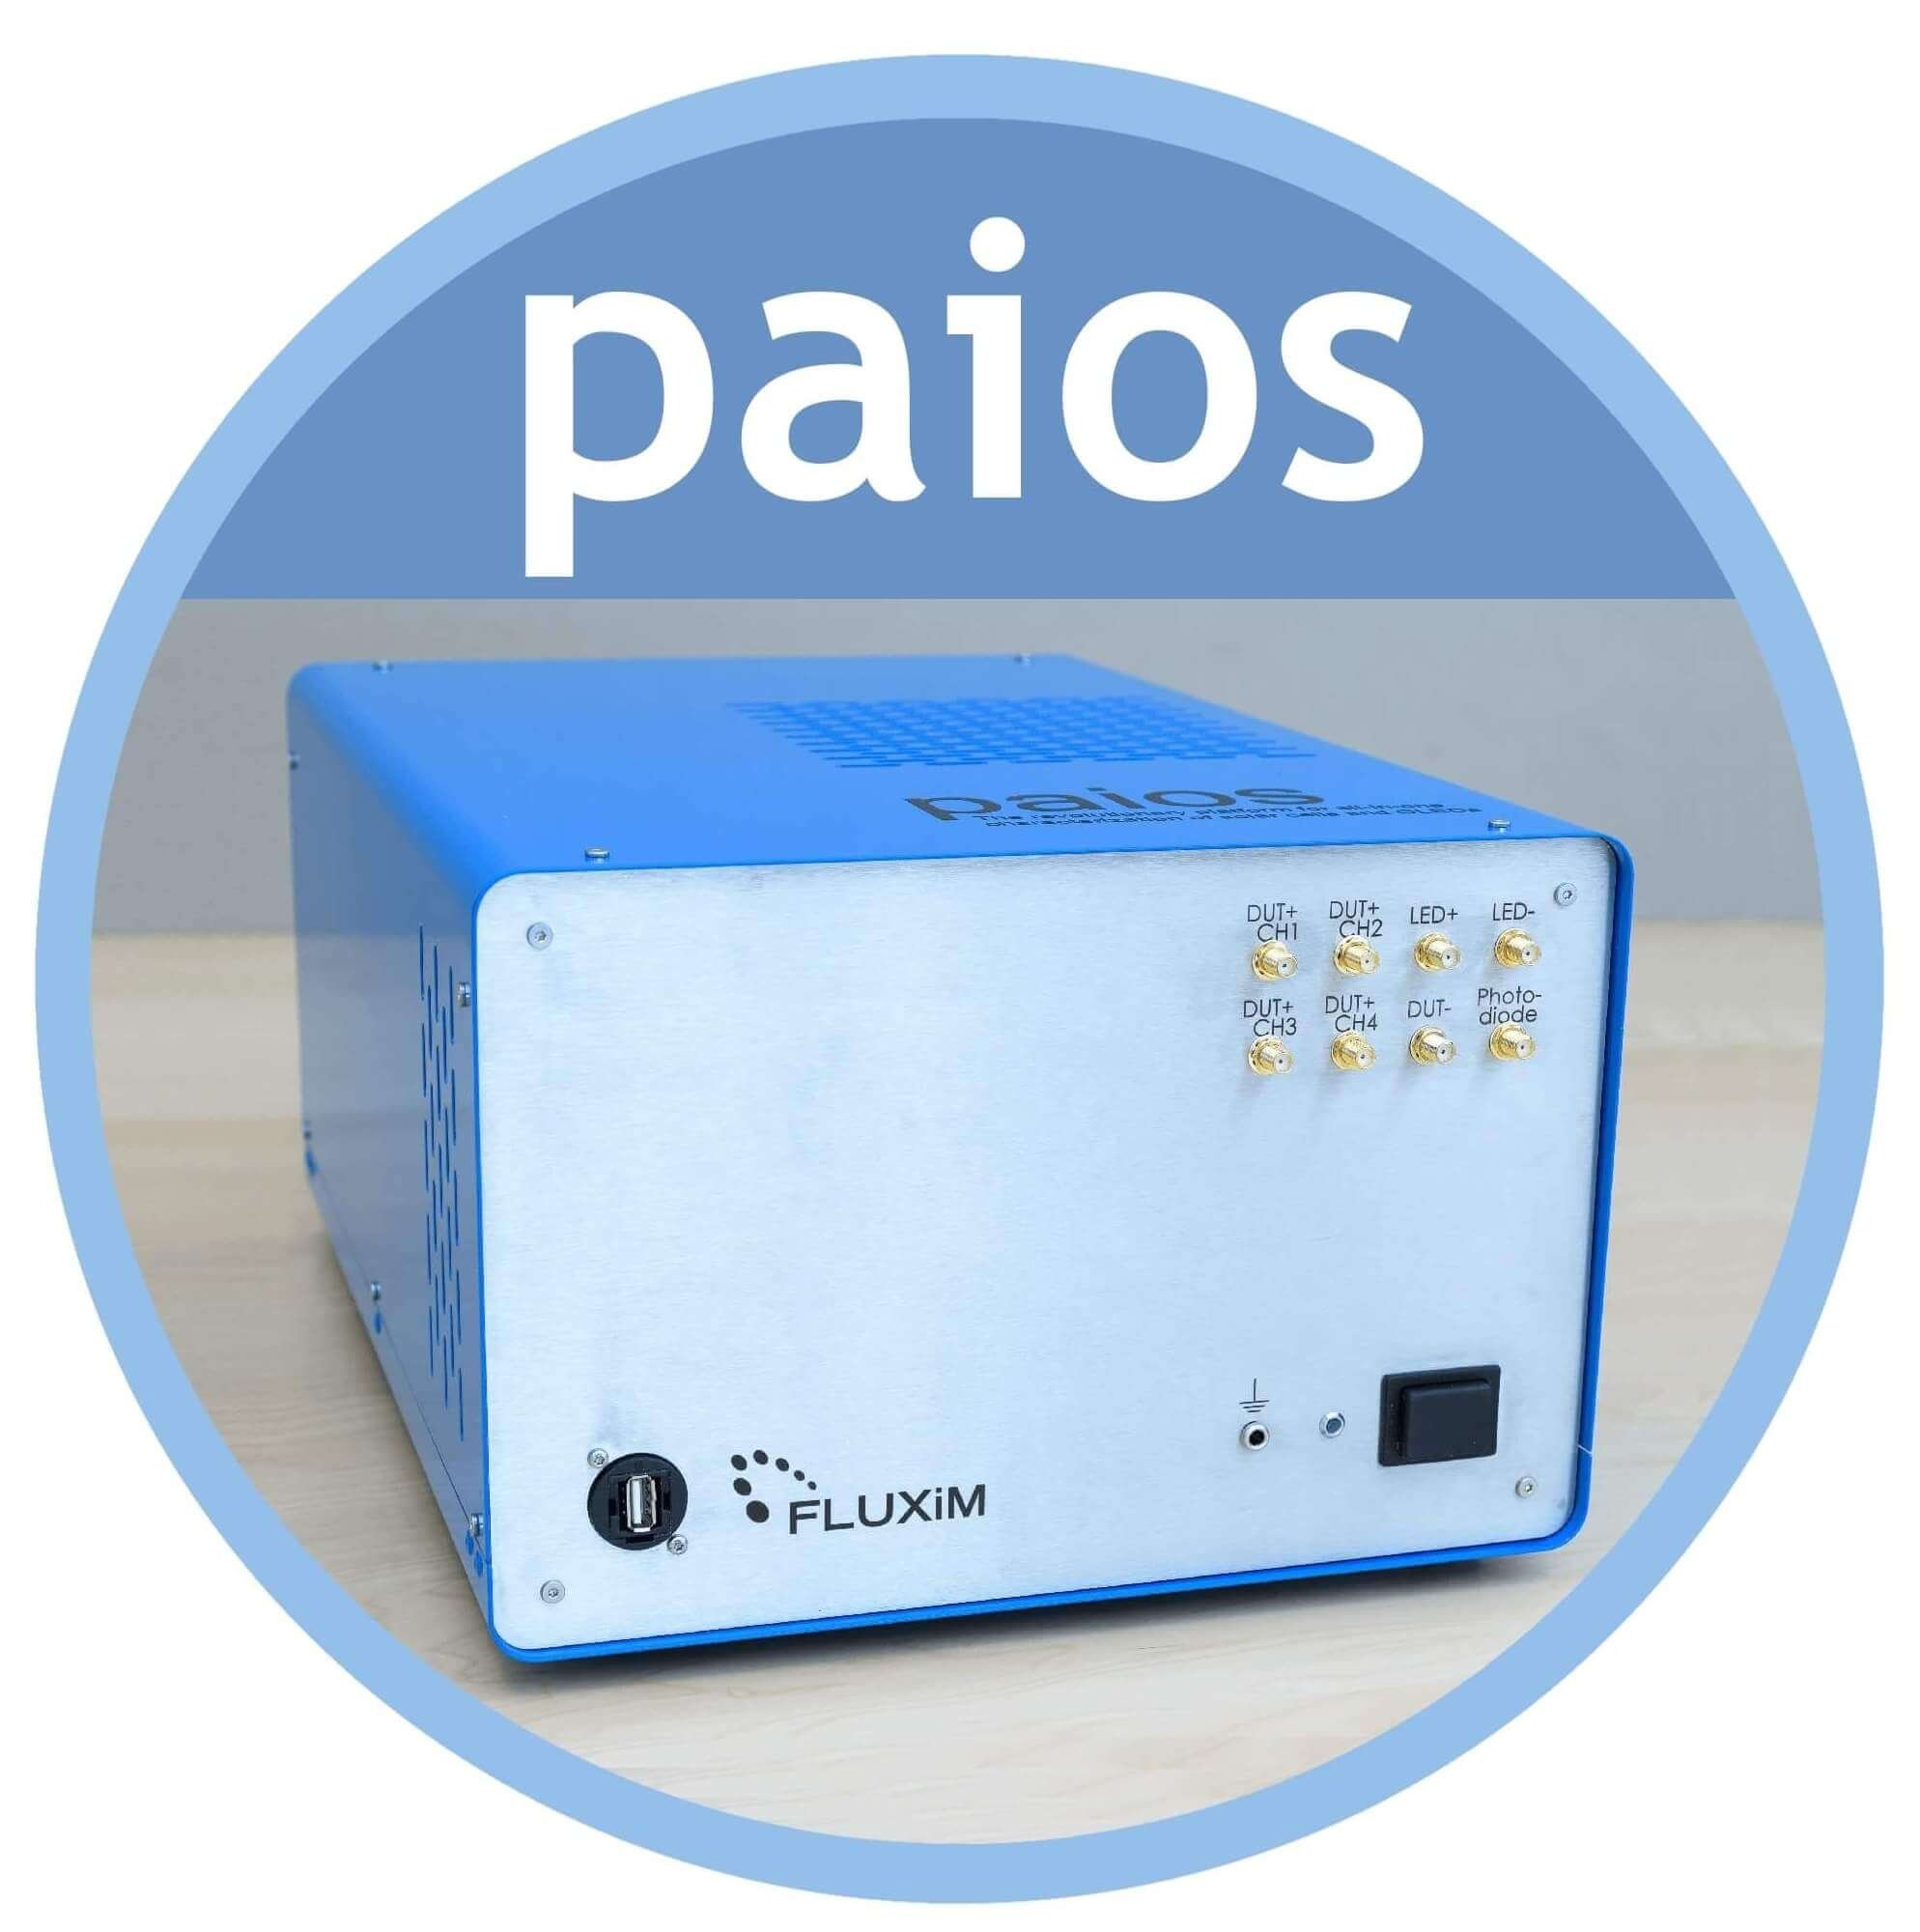 PAIOS - all in one optoelectrical characterization